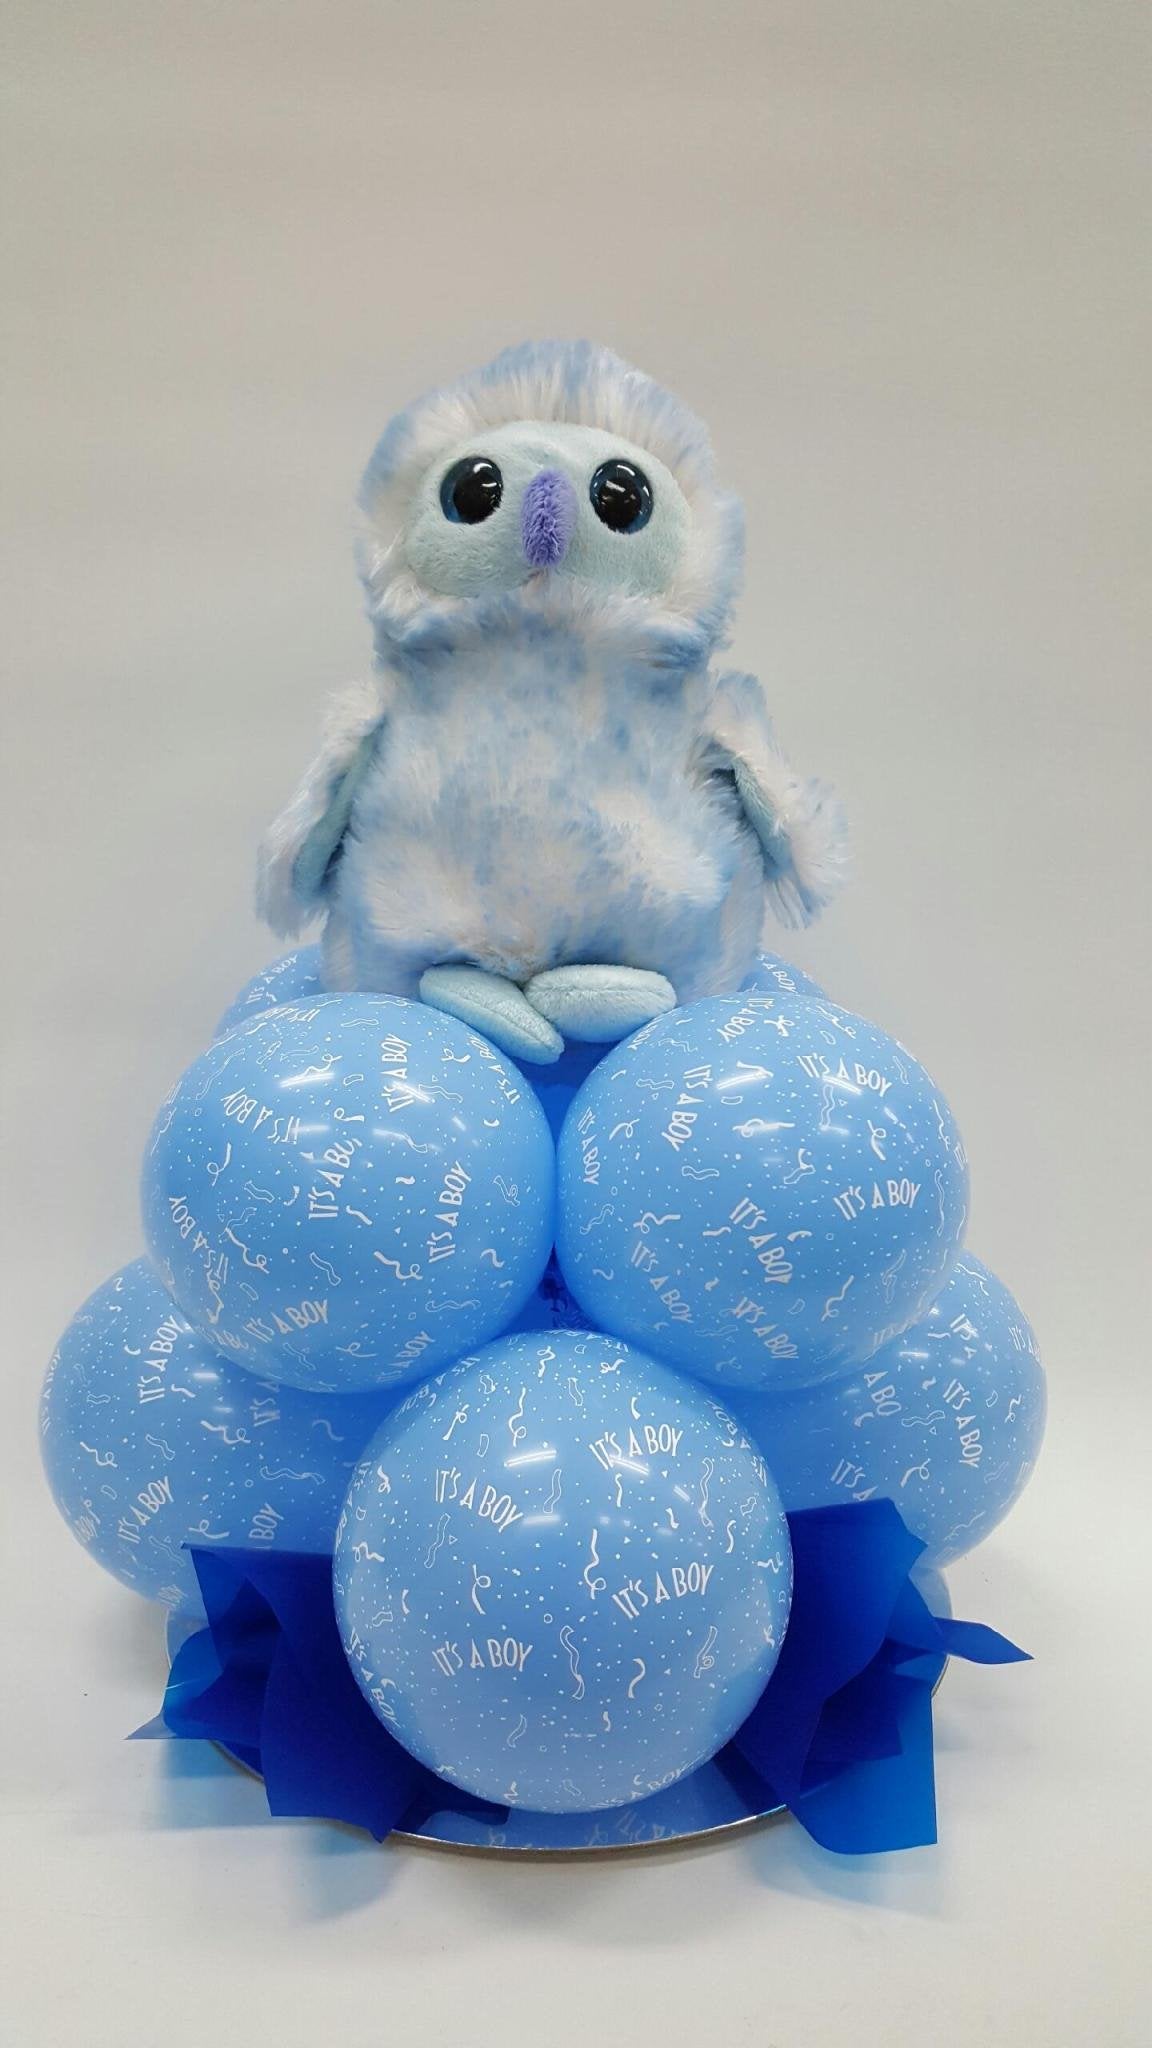 Balloon Romance Base Blue With Toy